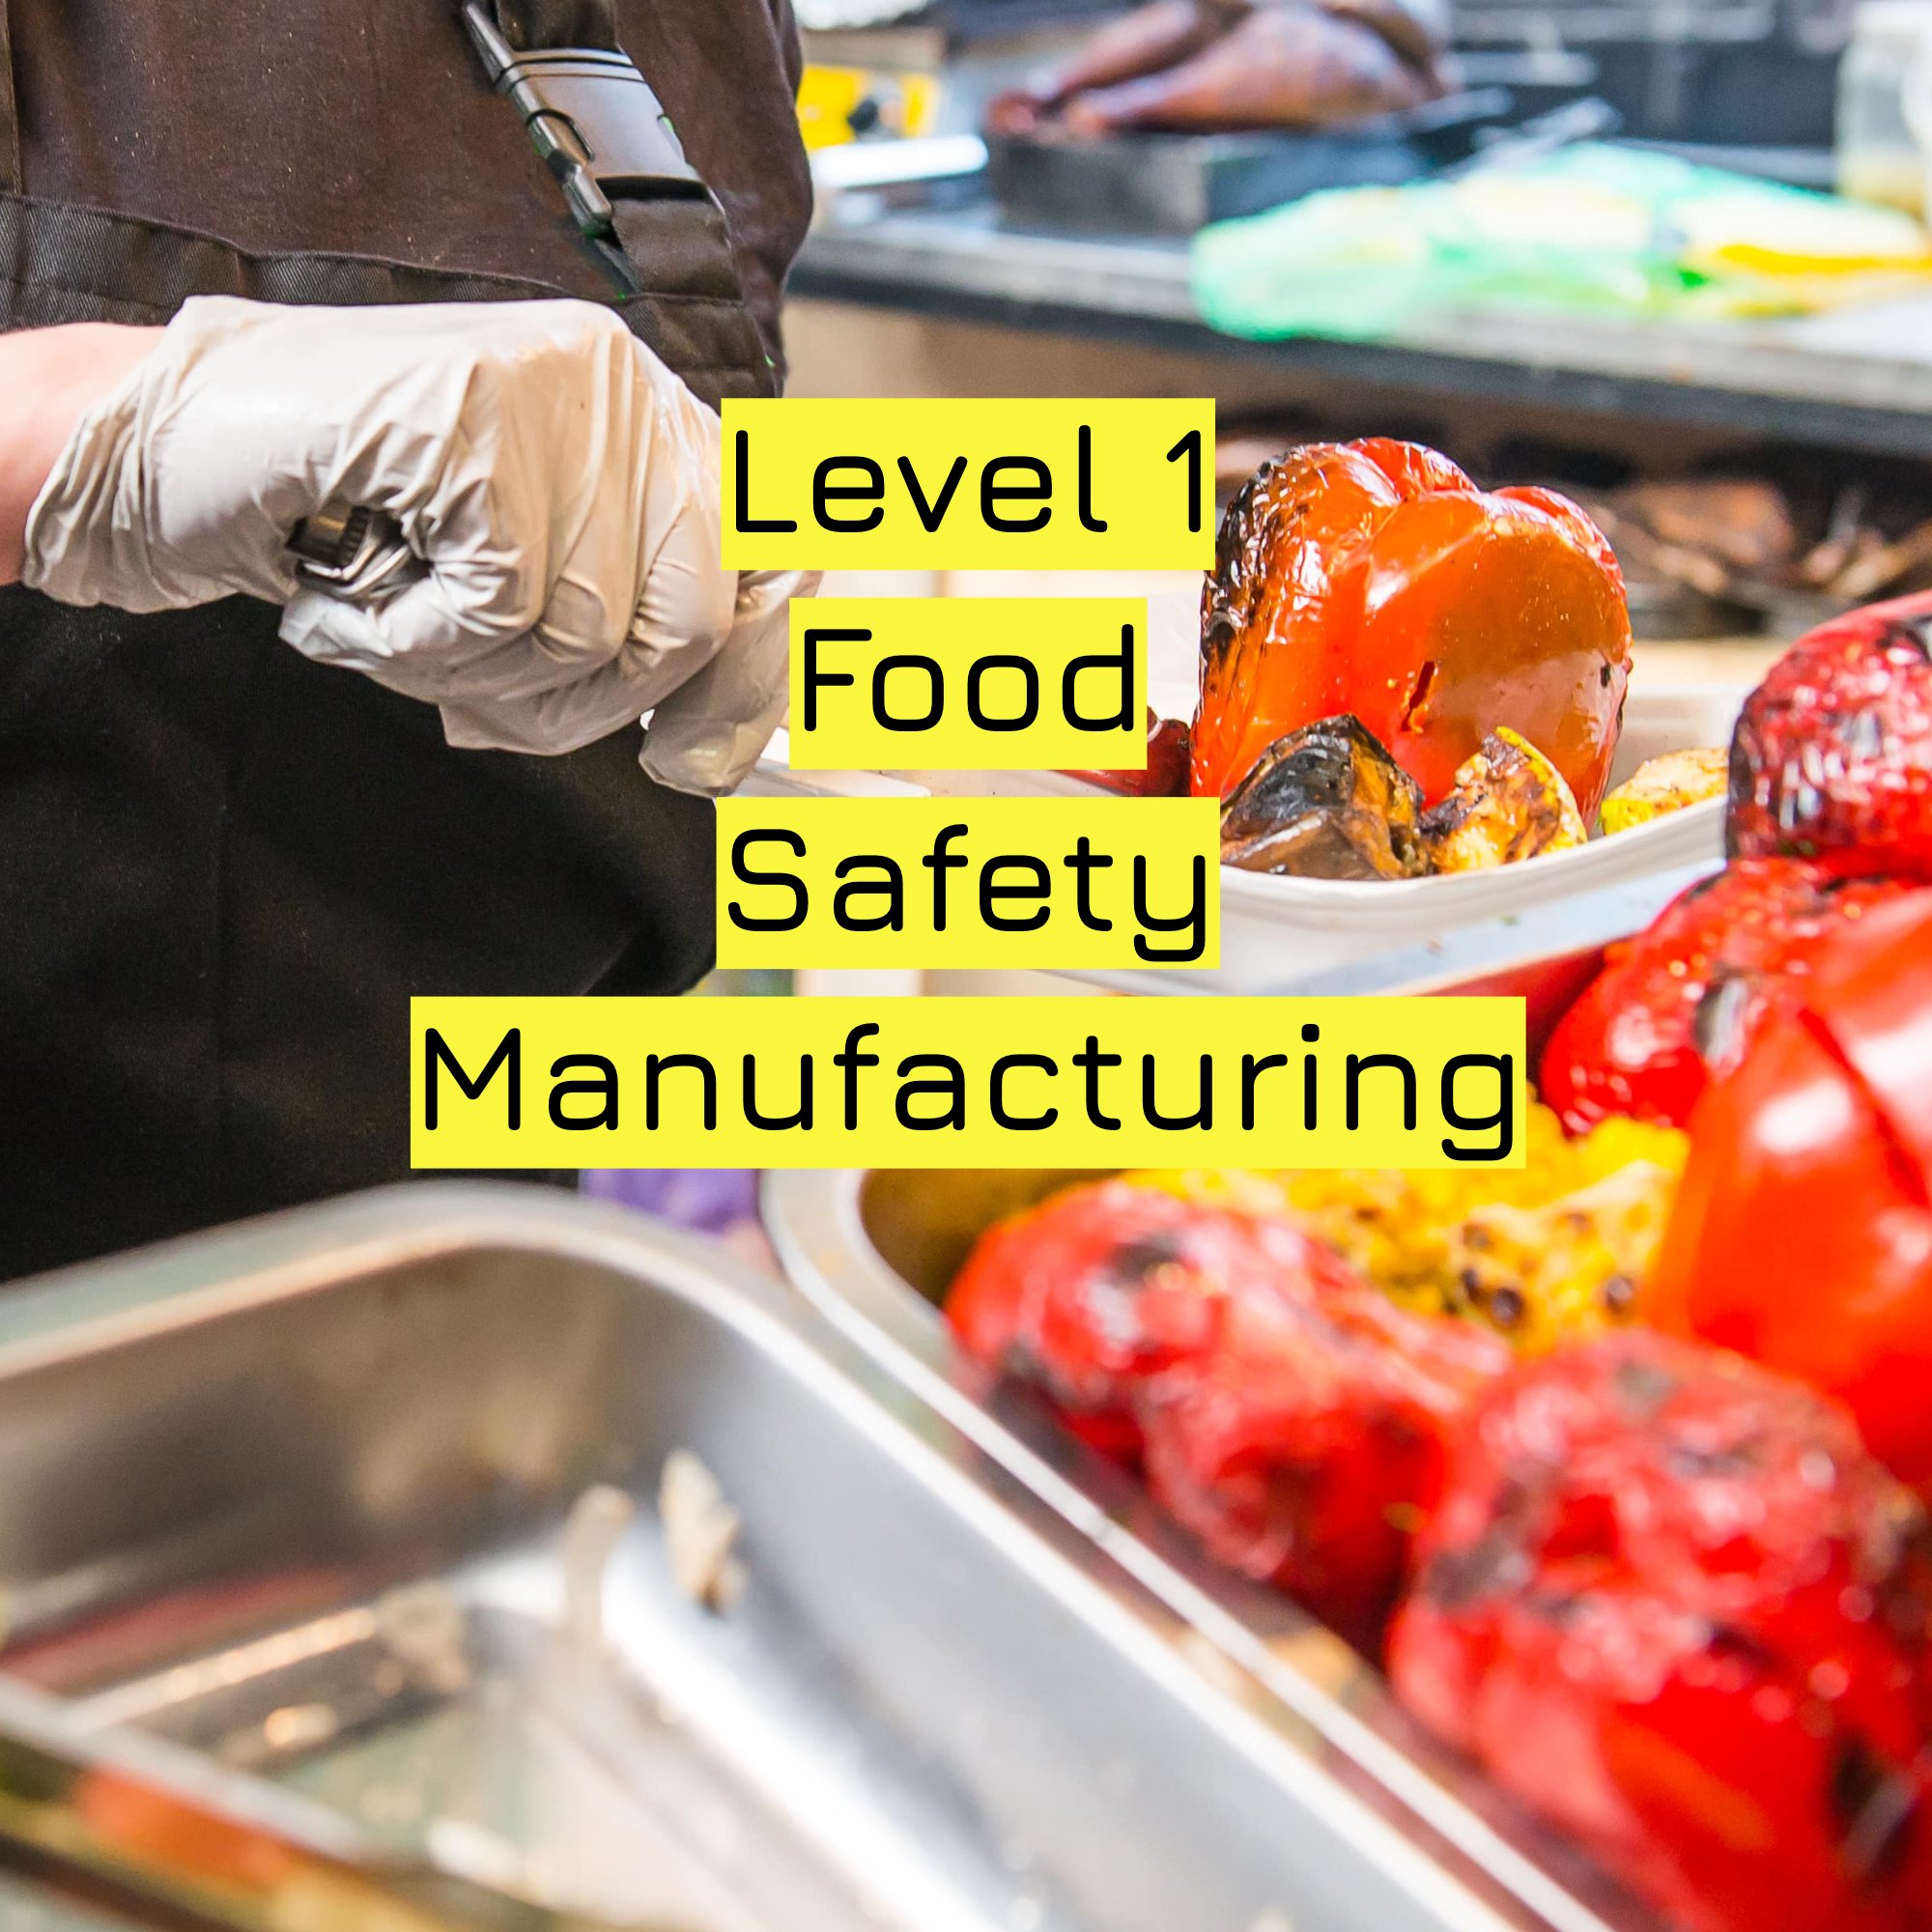 Level 1 Food Safety Manufacturing.jpg